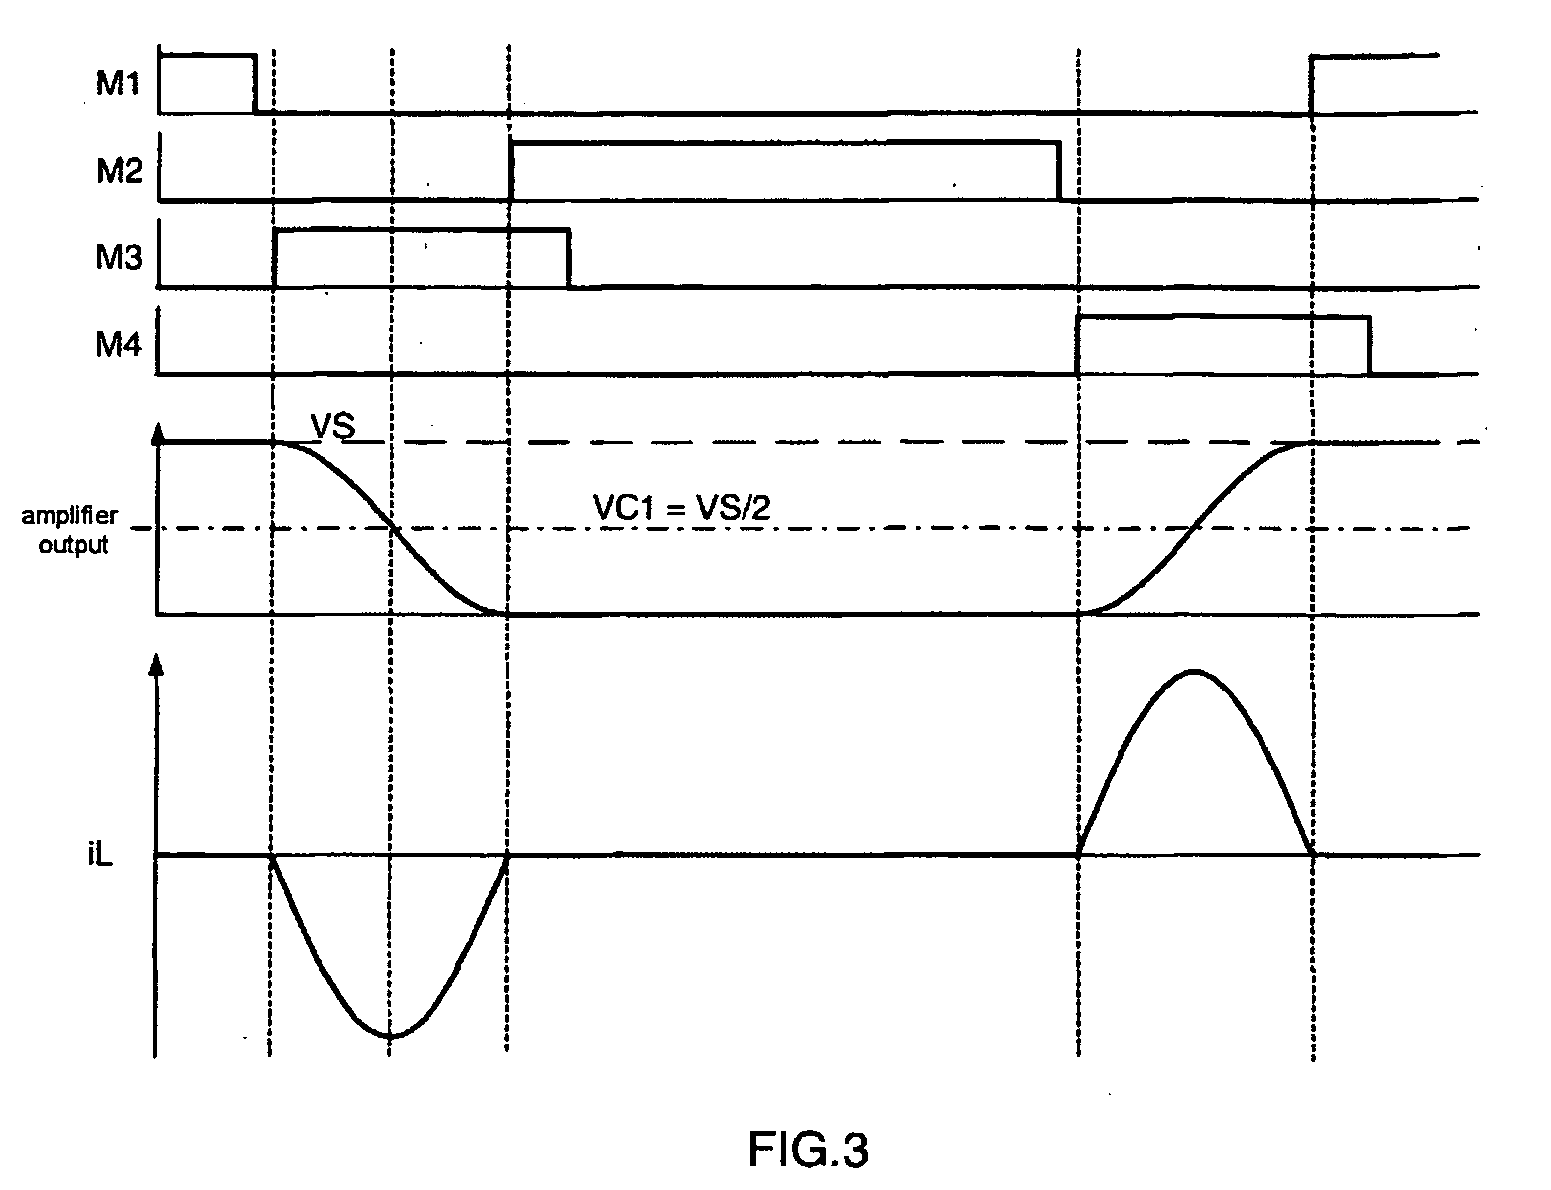 Amplifier designed to generate a rectangular voltage signal with soft switching on a capacitive load